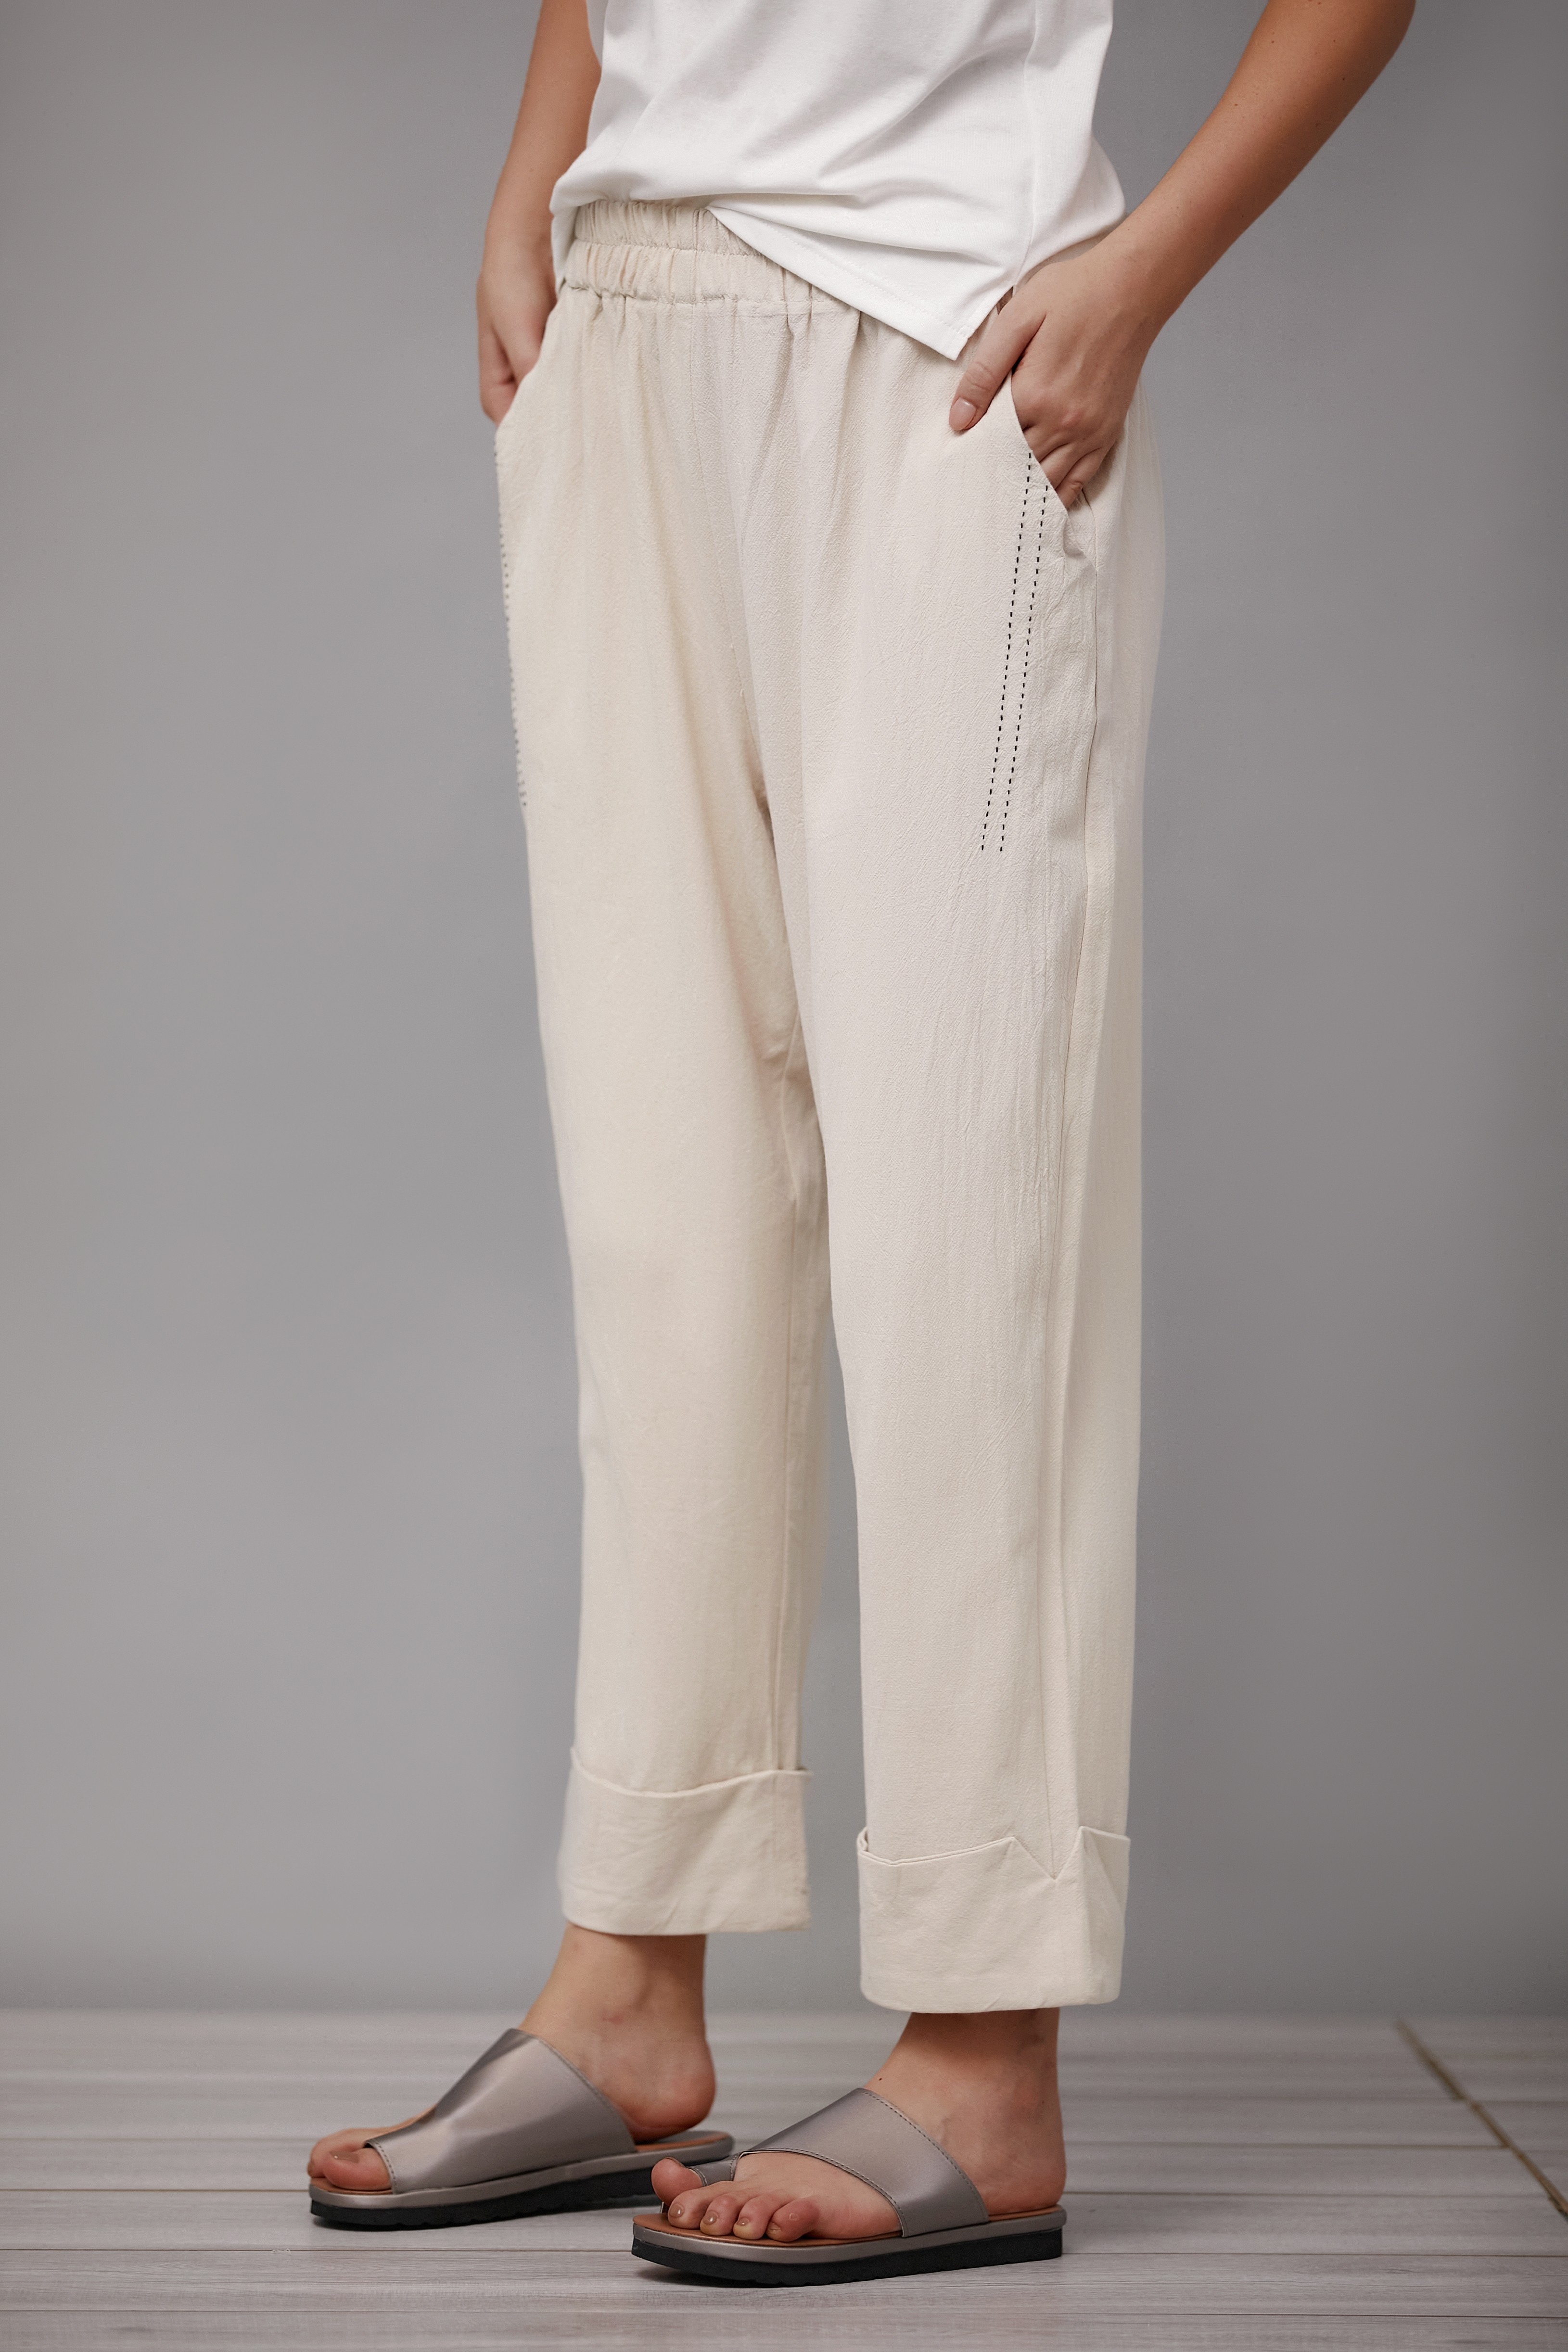 Apricot Solid with Pockets Casual Basic Loose Pants - Curwave